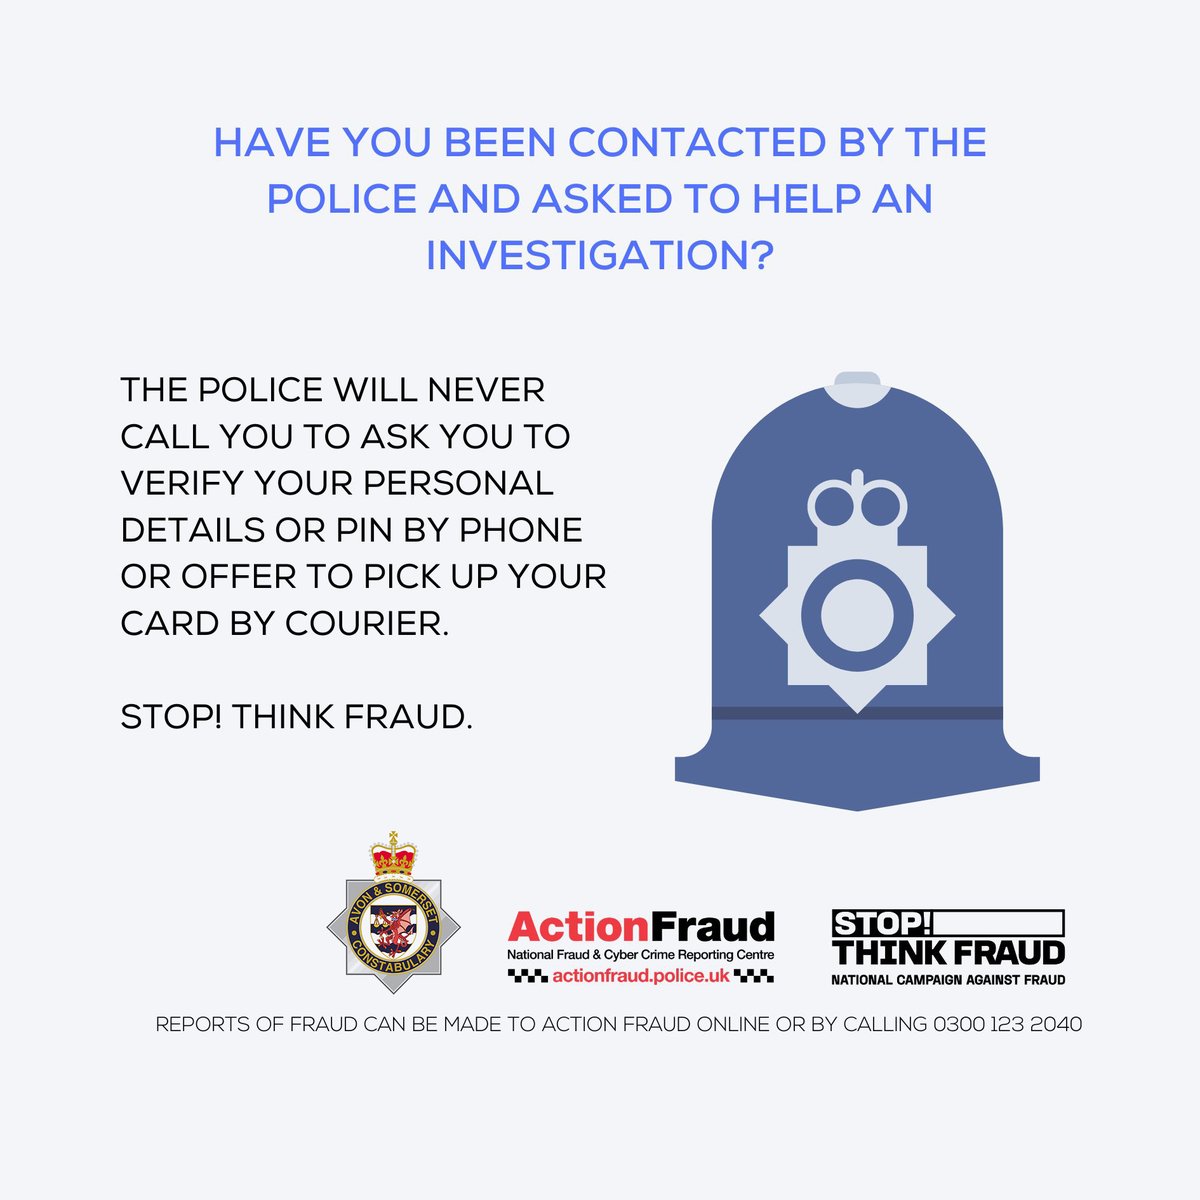 Criminals posing as police officers is common with courier fraud. They will try to convince you that you are helping an investigation by handing over money or purchasing gold. If this happens, hang up and dial 999. You can also make a fraud report at orlo.uk/r69Fv